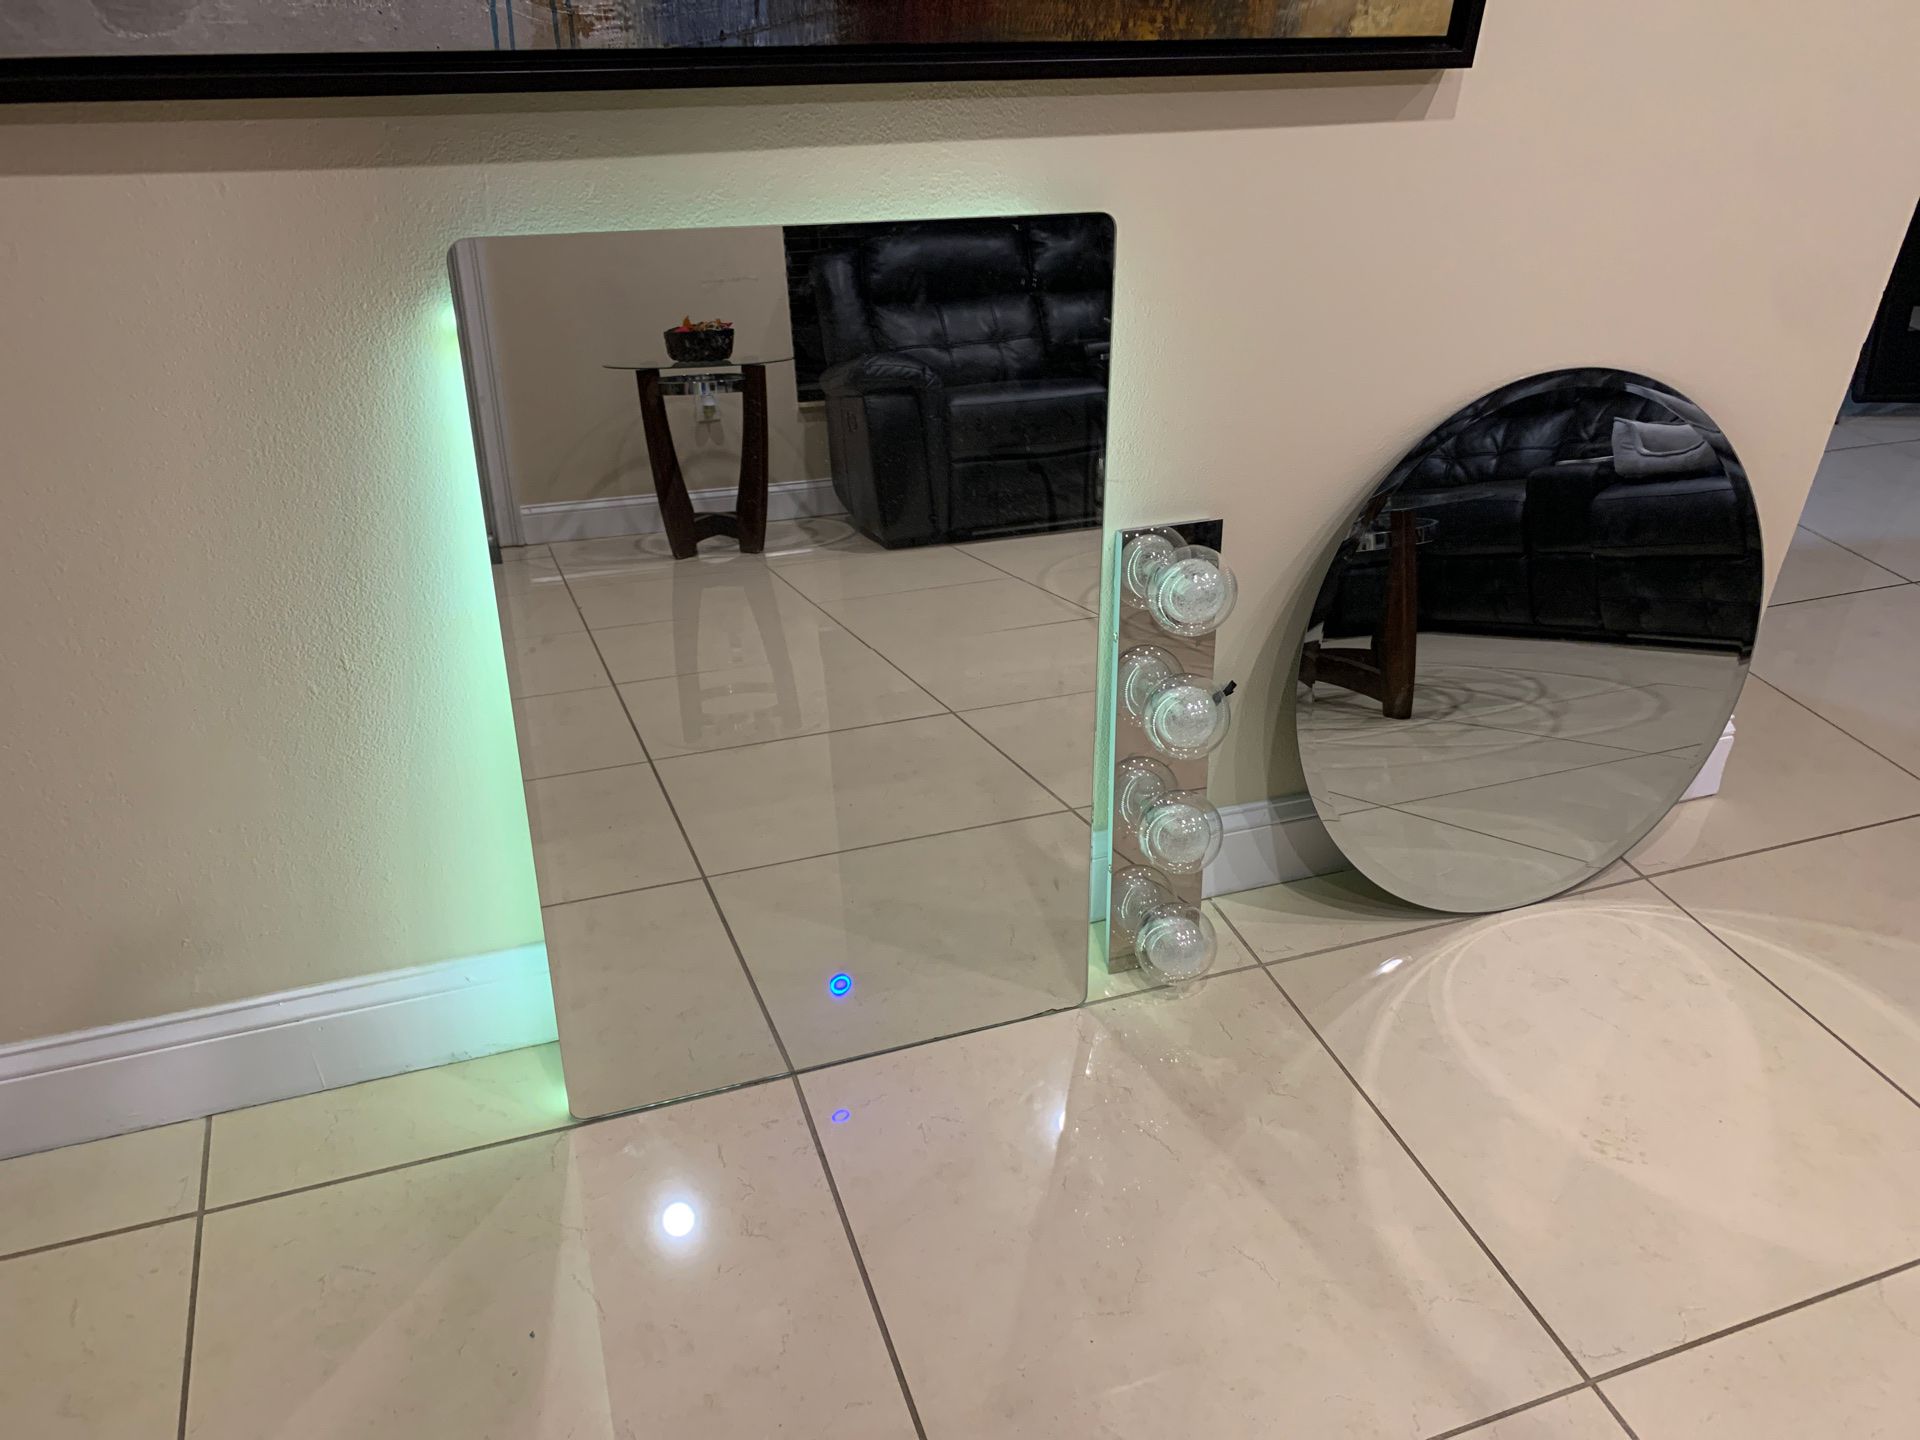 Light up mirror with lights and oval mirror bundle.